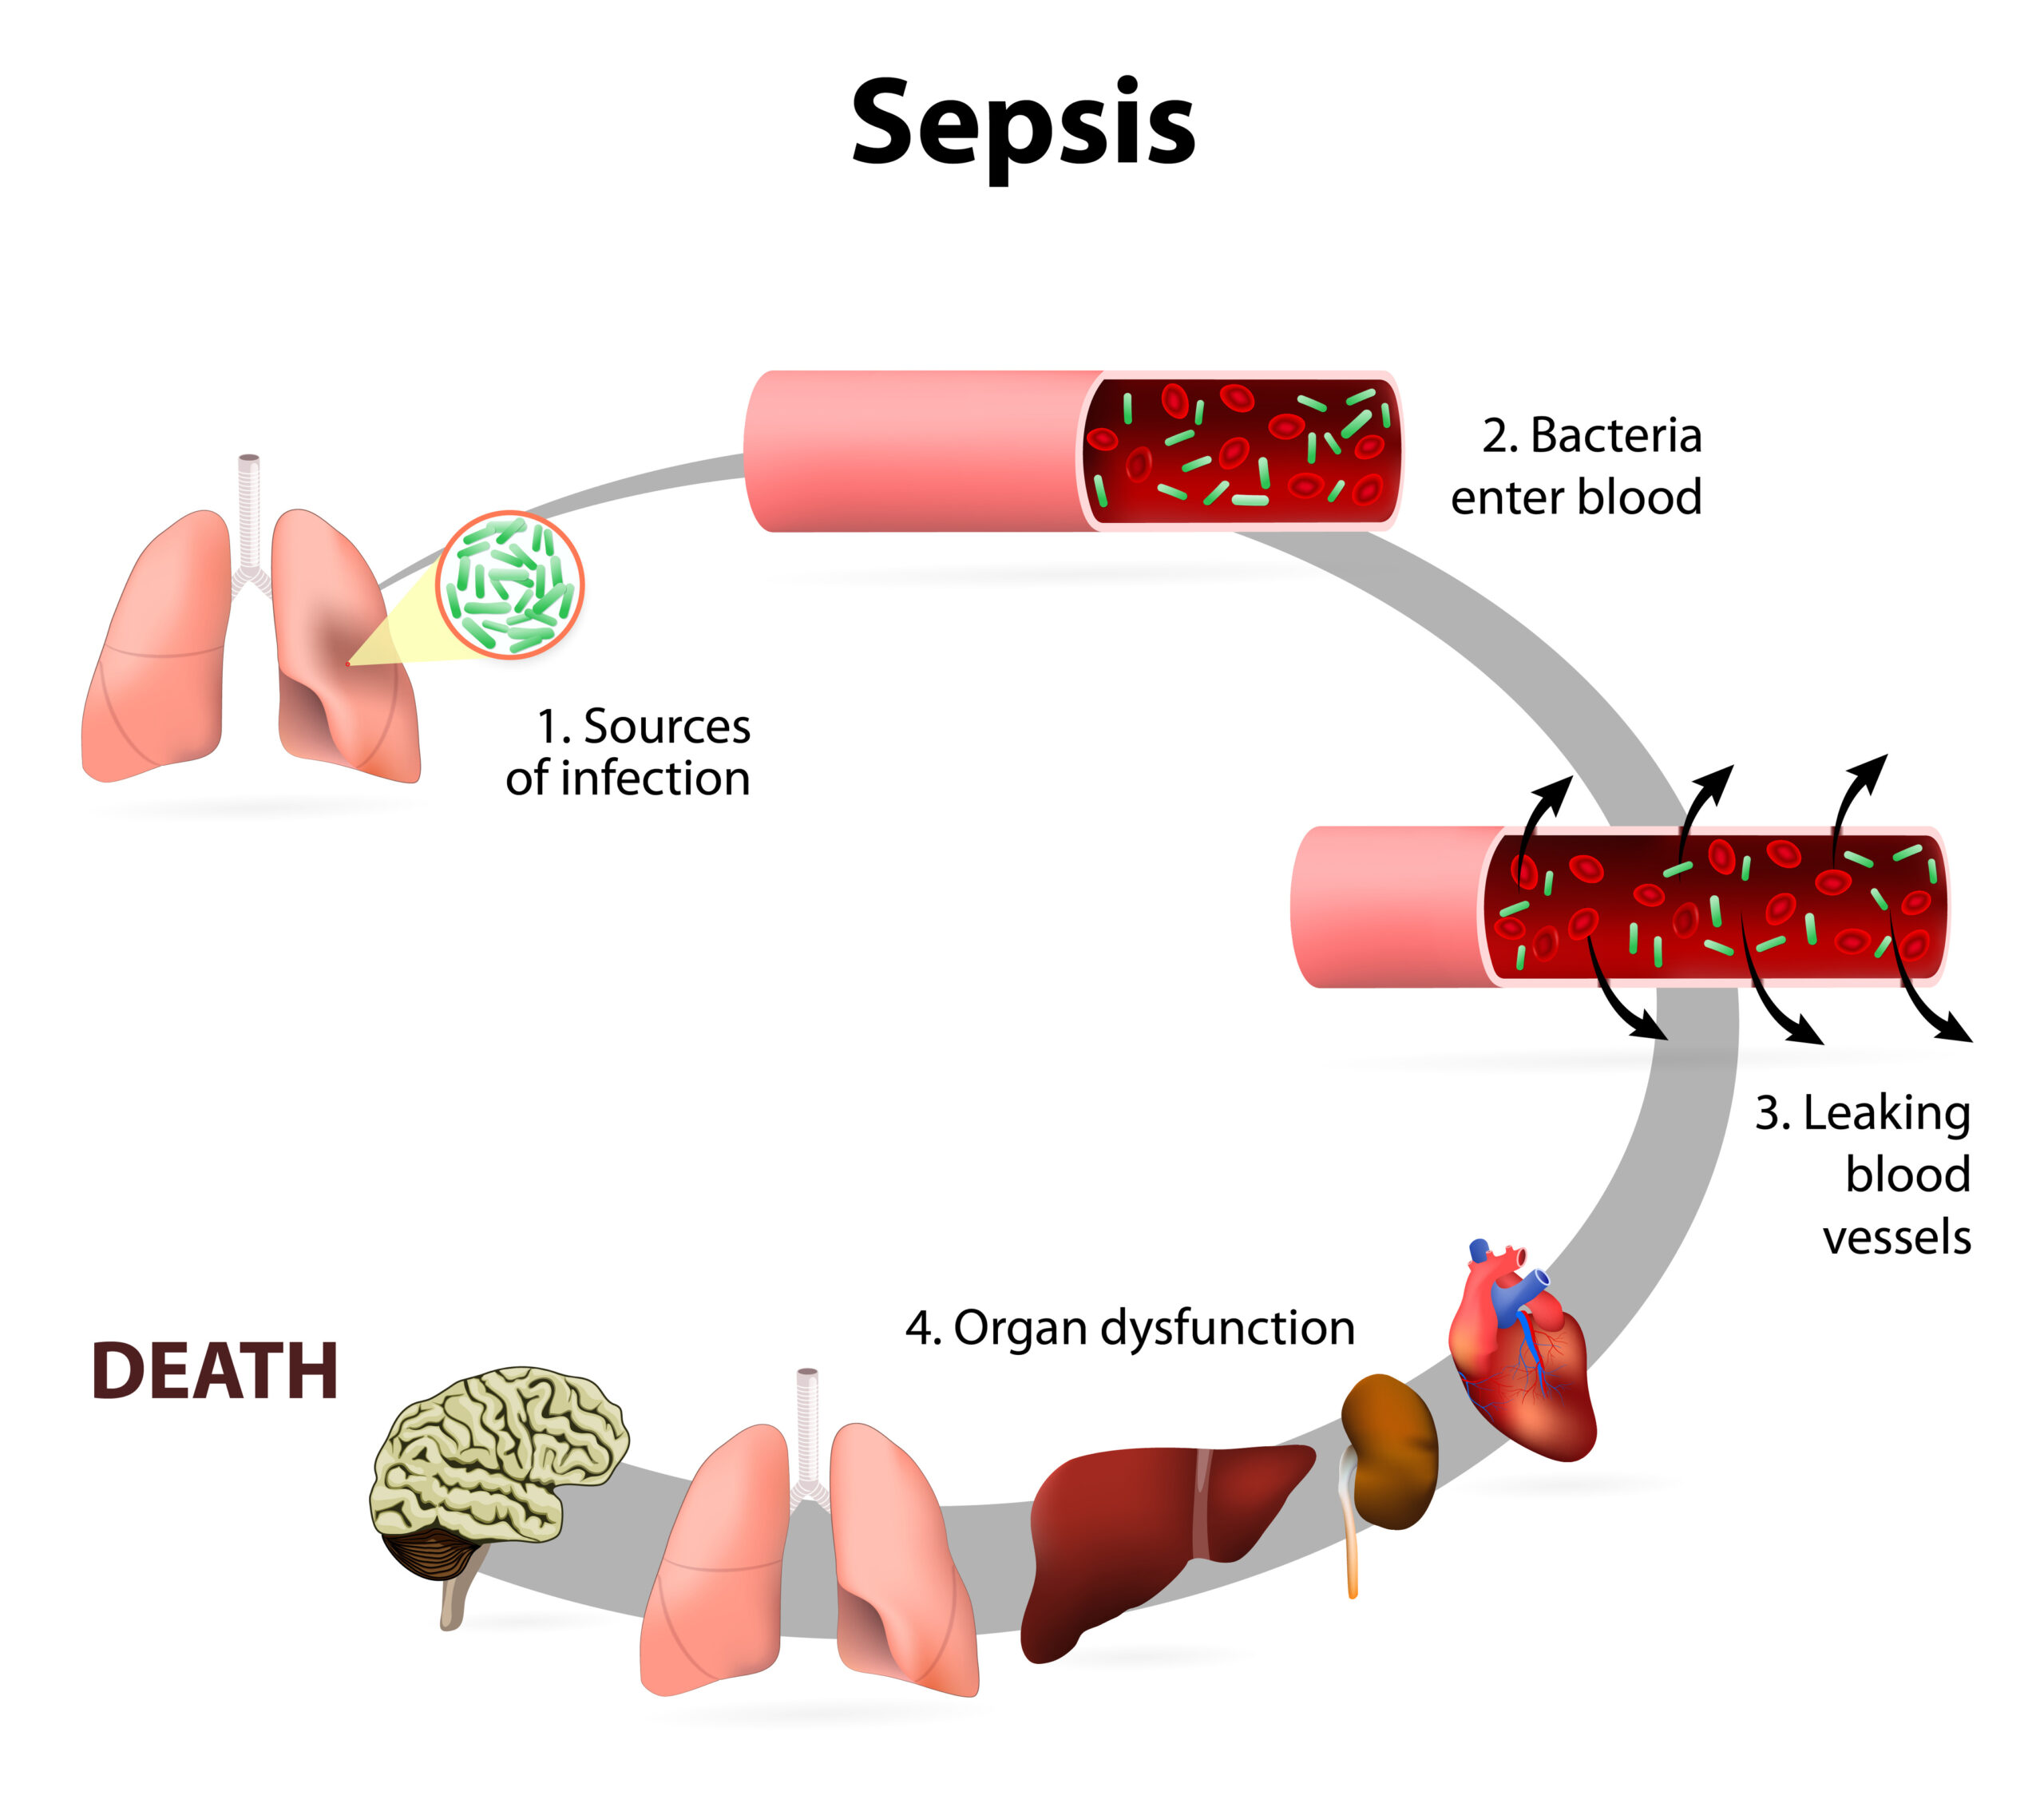 A diagram showing the four lifecycles of sepsis from source of infection to death. 